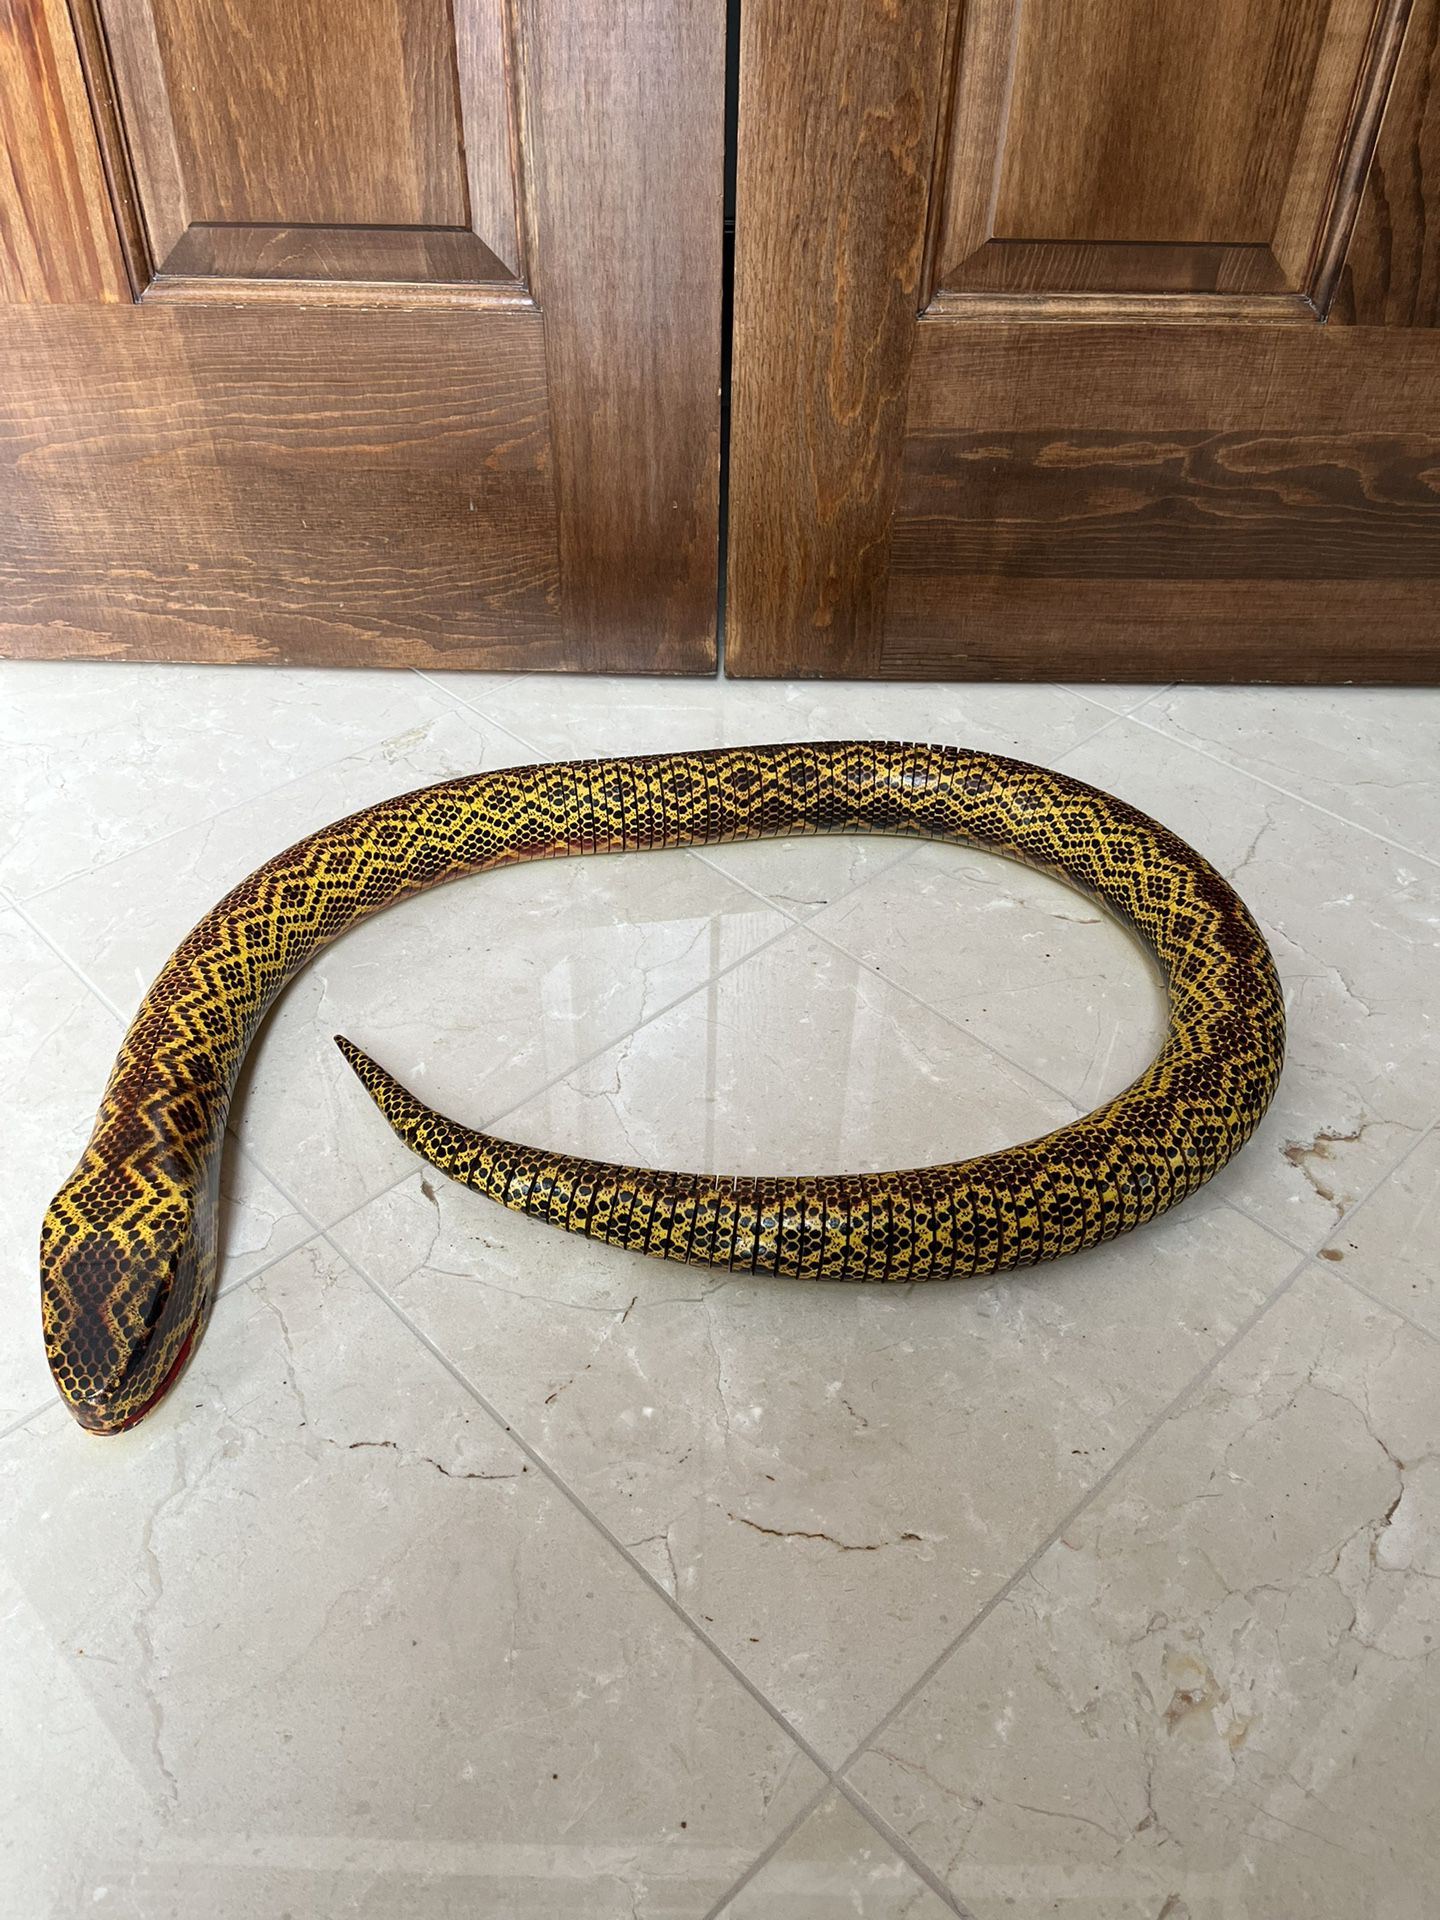 Articulated Wood Snake